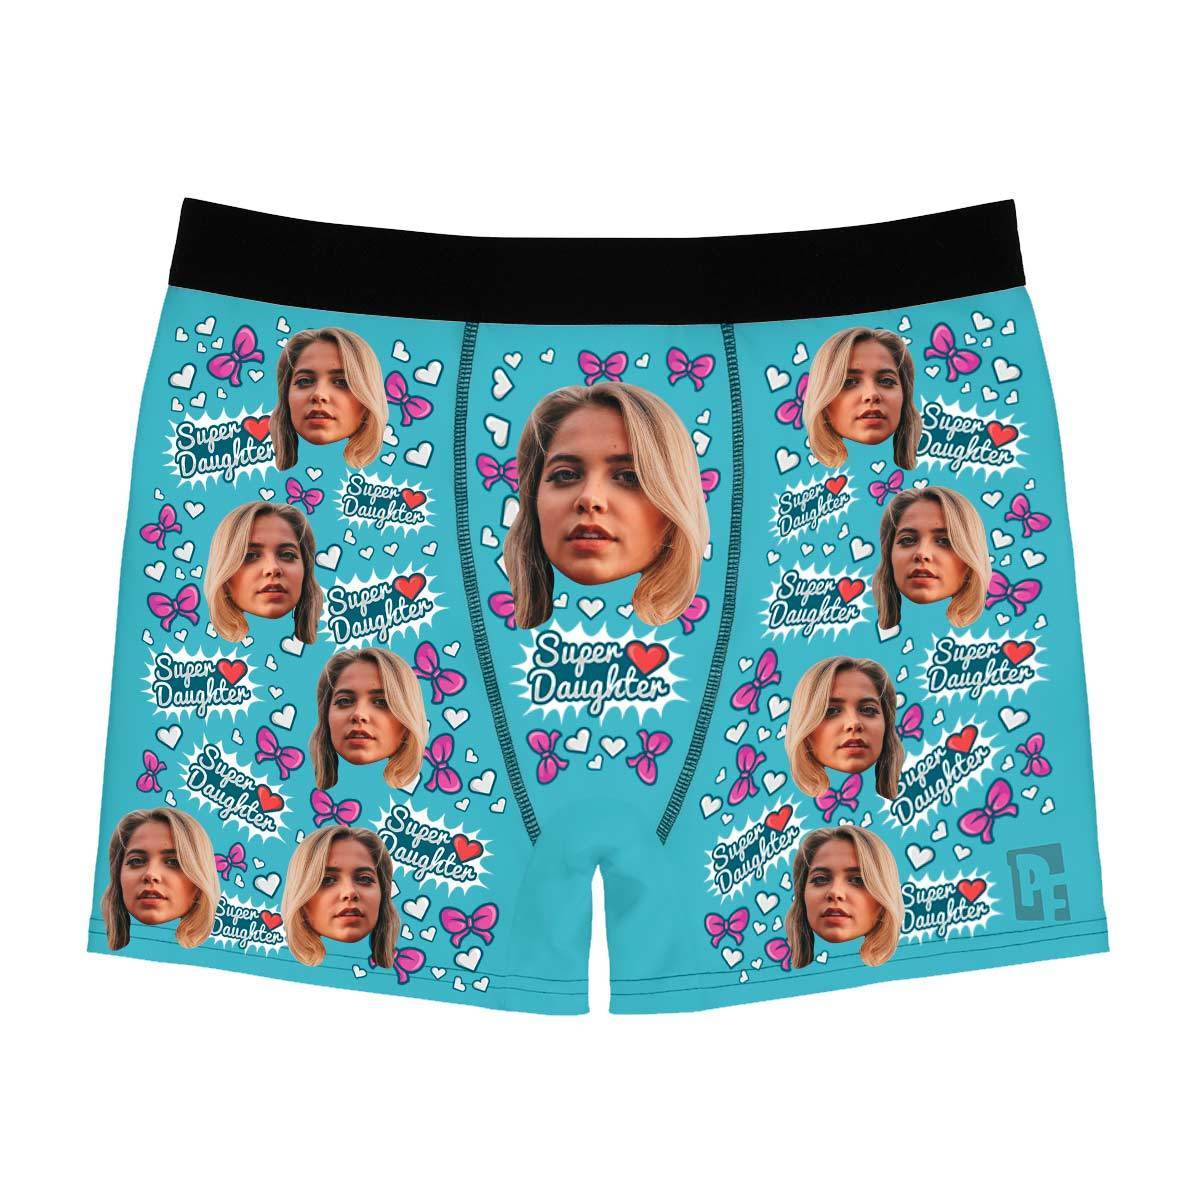 Blue Super daughter men's boxer briefs personalized with photo printed on them